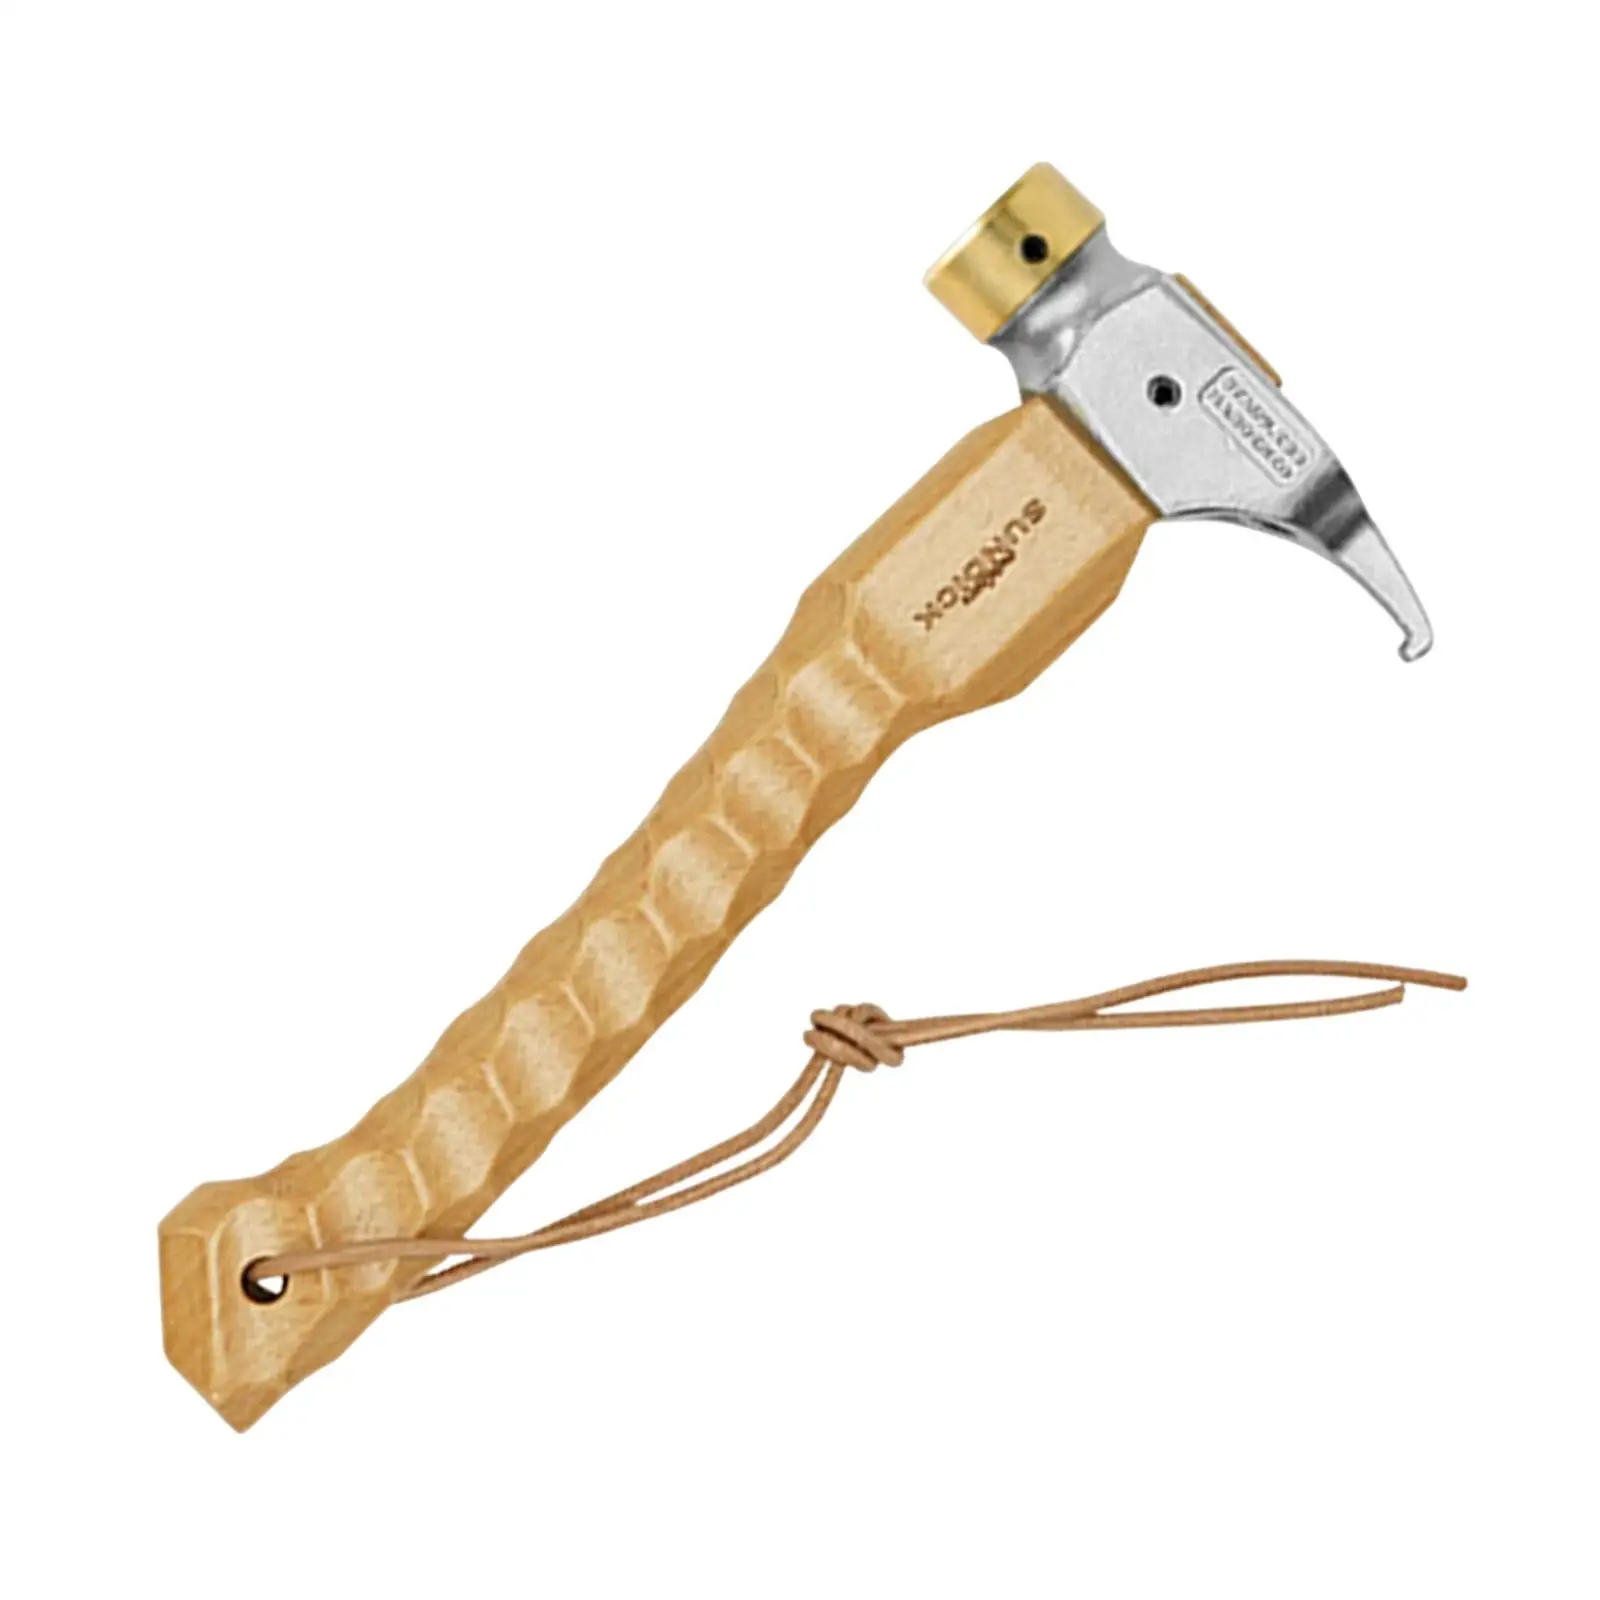 Camping Hammer Camping Accessories with Hanging Rope Wood Handle for Hunting